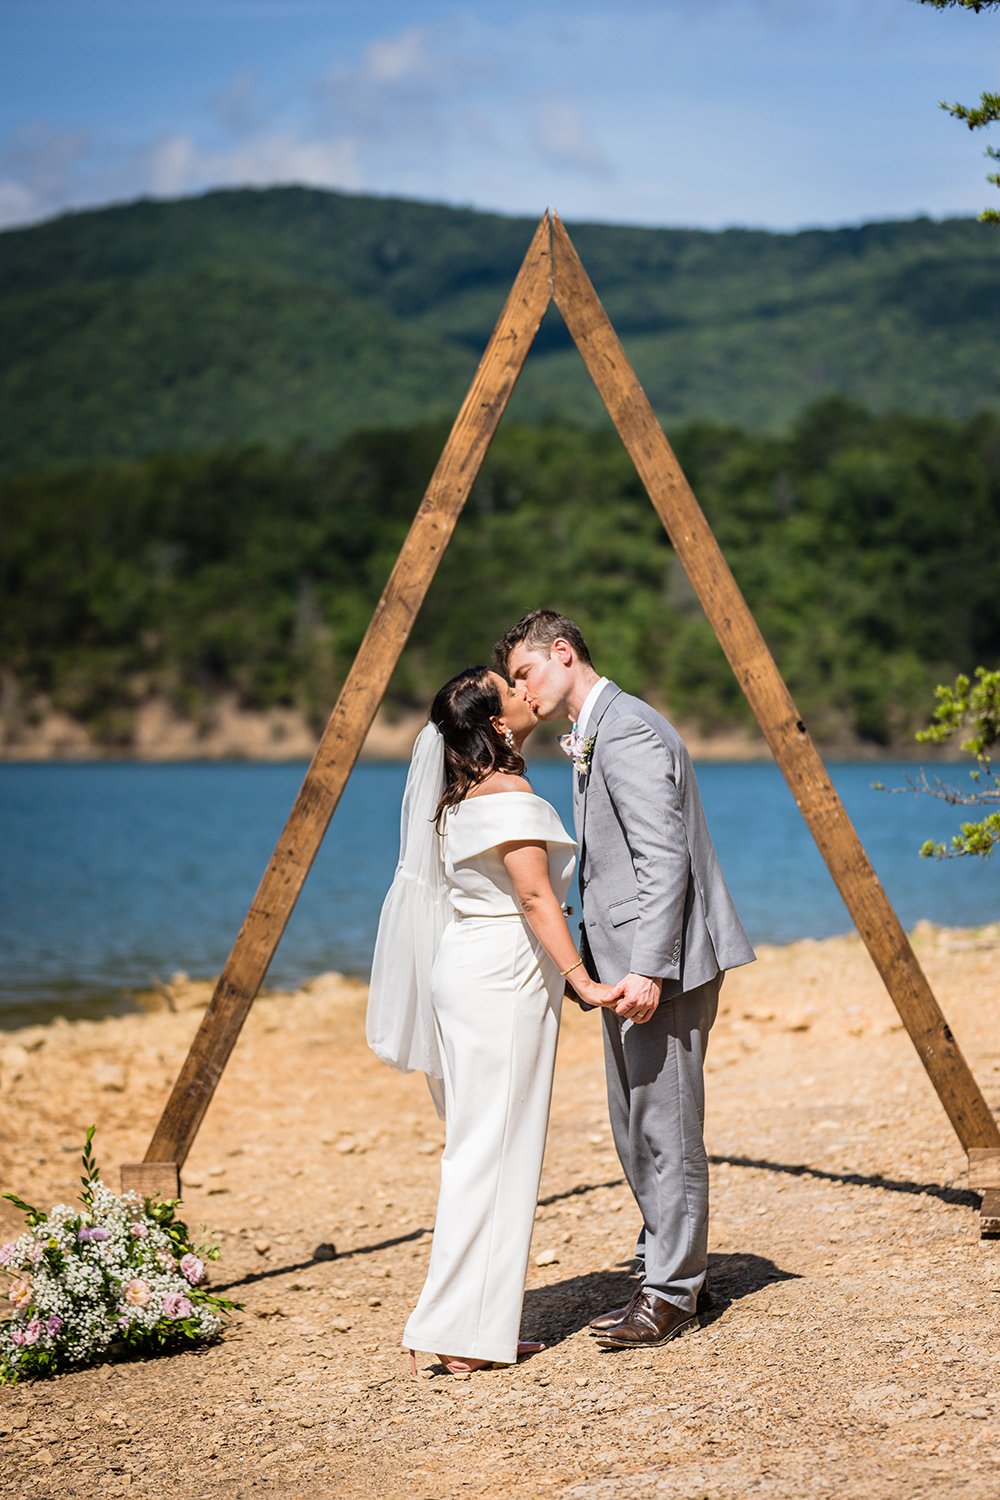 Two marriers stand underneath a triangle wooden arch and go in for their first kiss during their elopement at Carvin’s Cove in Roanoke, Virginia.